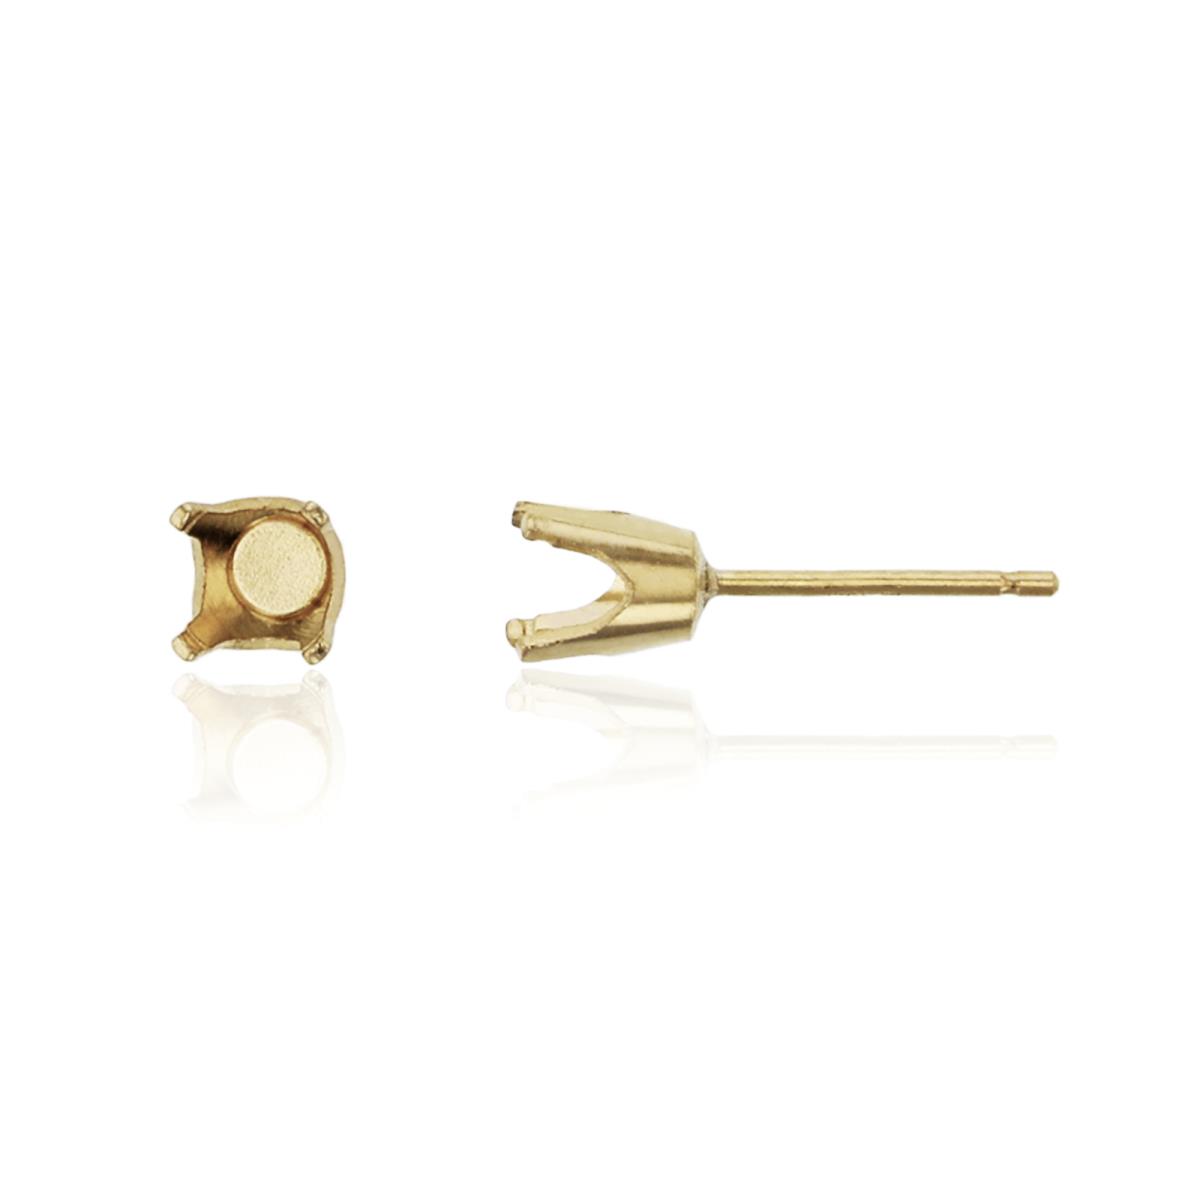 14K Yellow Gold 4mm Rd 4-Prong Die Struck Stud Earring Finding (PC)